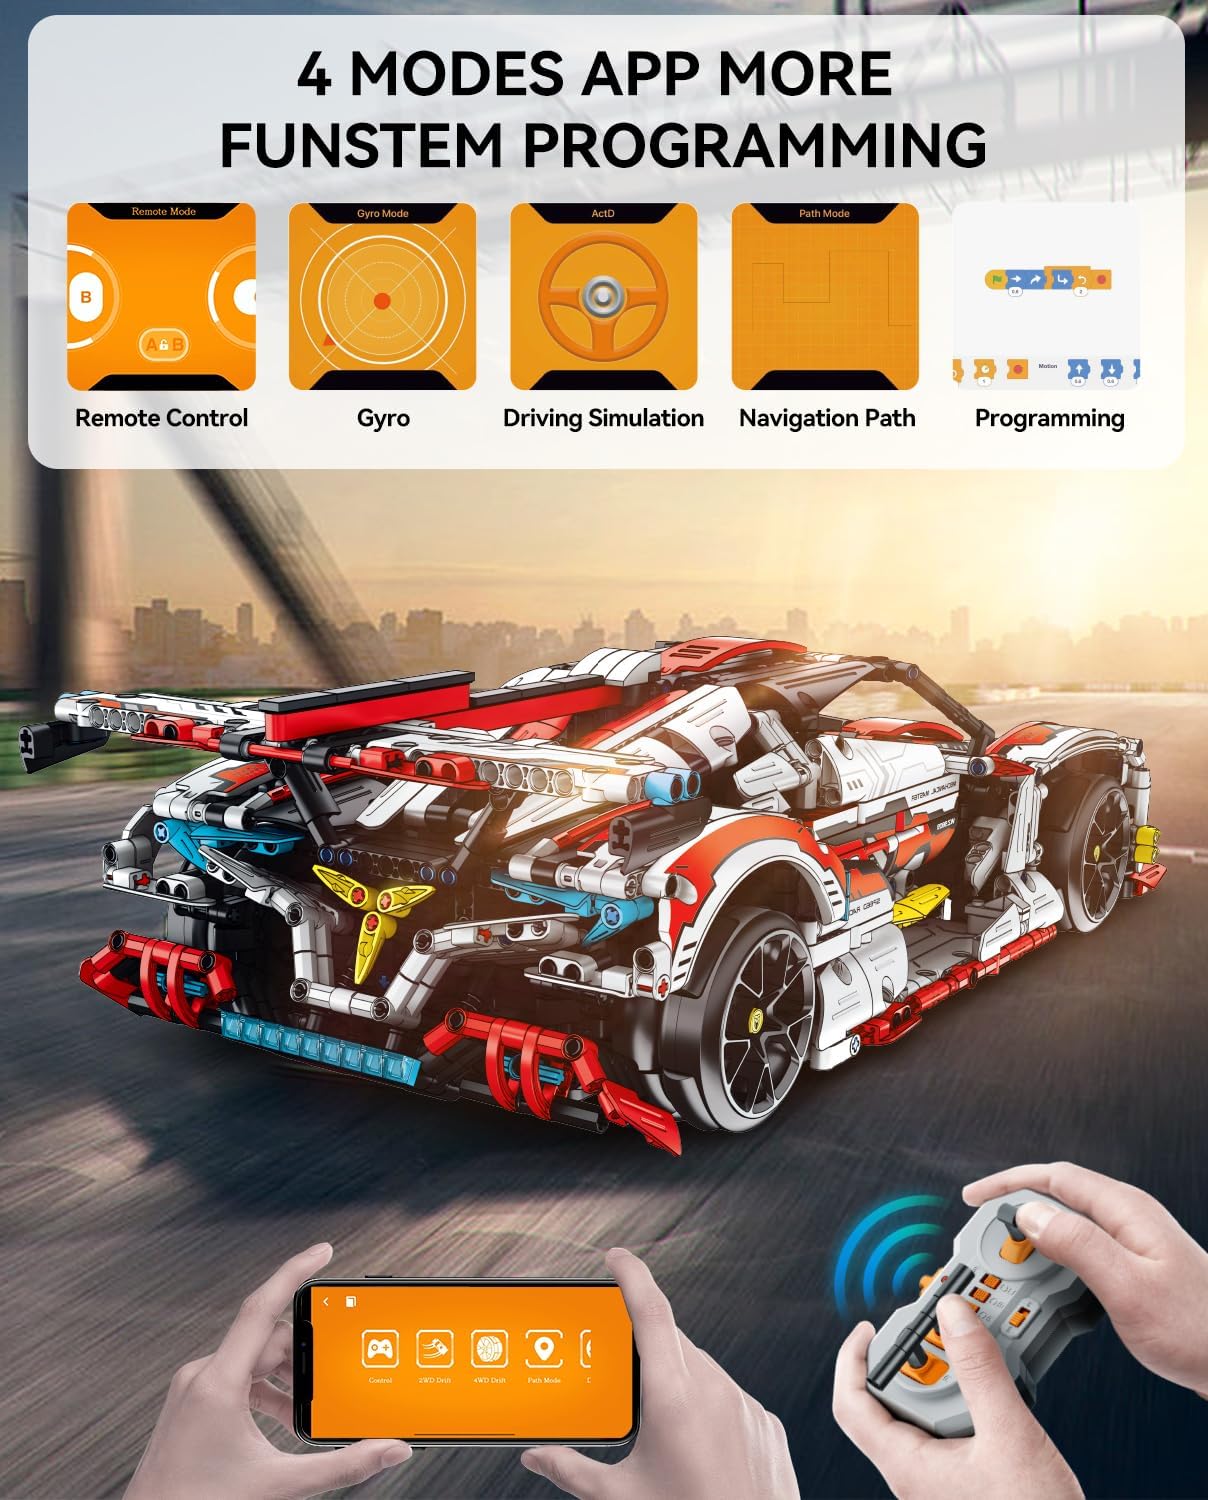 1:10 Race Car MOC Building Kit and Engineering Toy, Adult Collectible Sports Car Technology Car Building Kit, Remote Control Scale Sports Car Model for Adults Men Teens(2277 Pcs)